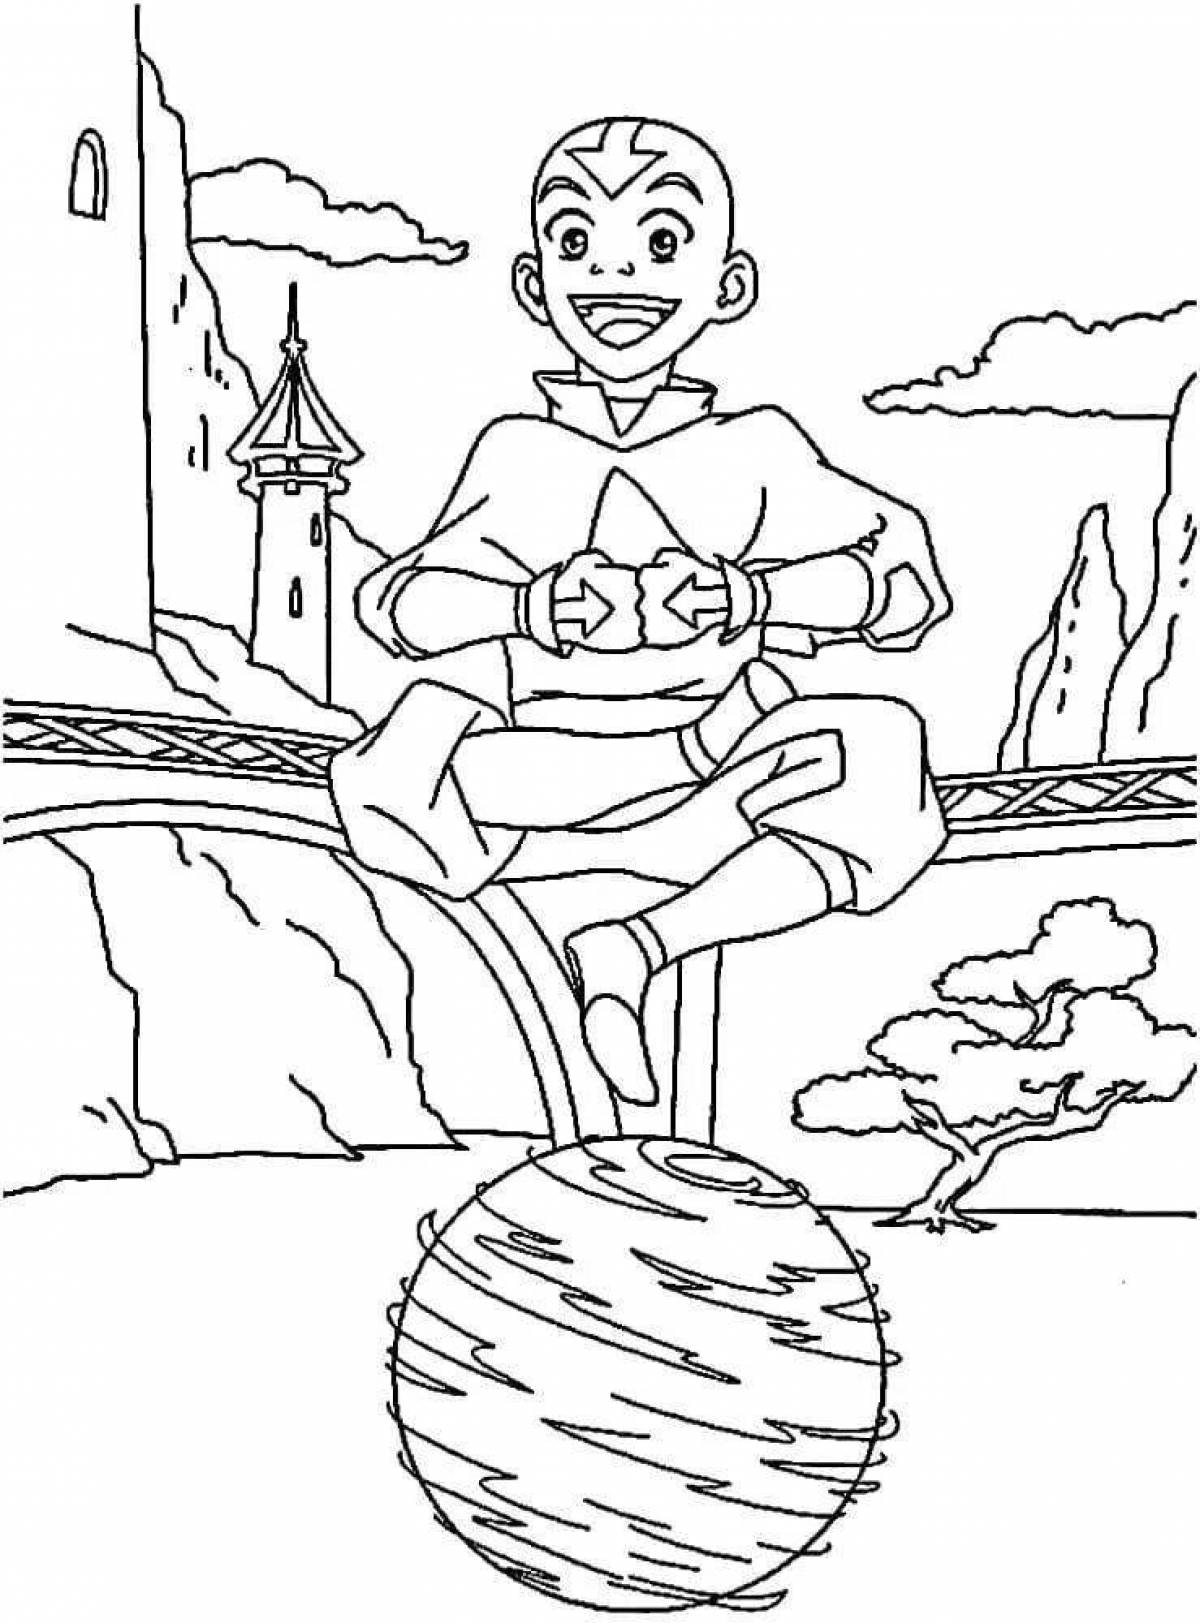 Coloring live aang avatar